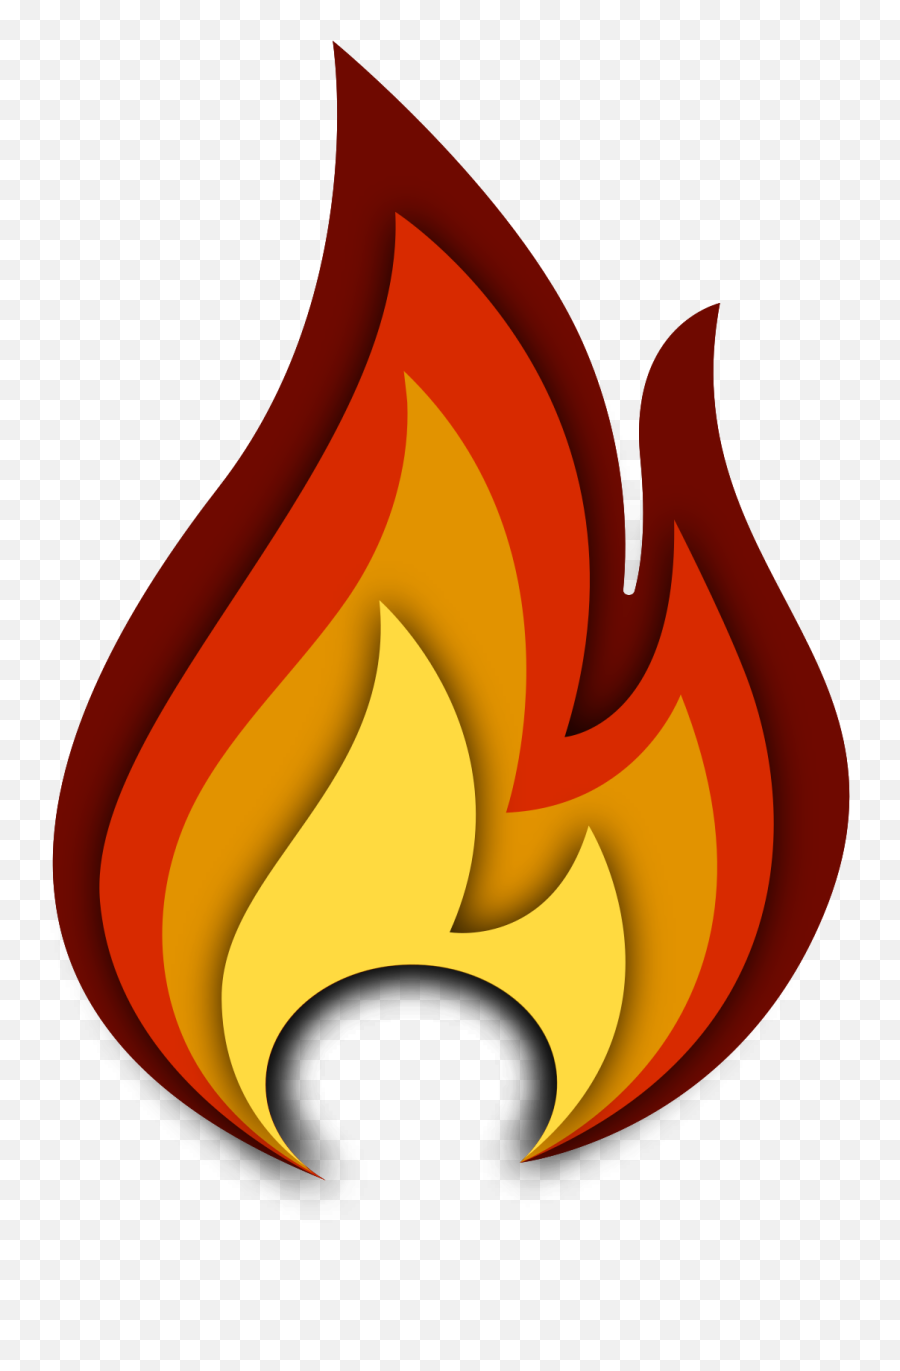 1188562 Png With Transparent Background - Fuego Free Fire Png Emoji,Fire Emoticon Hd